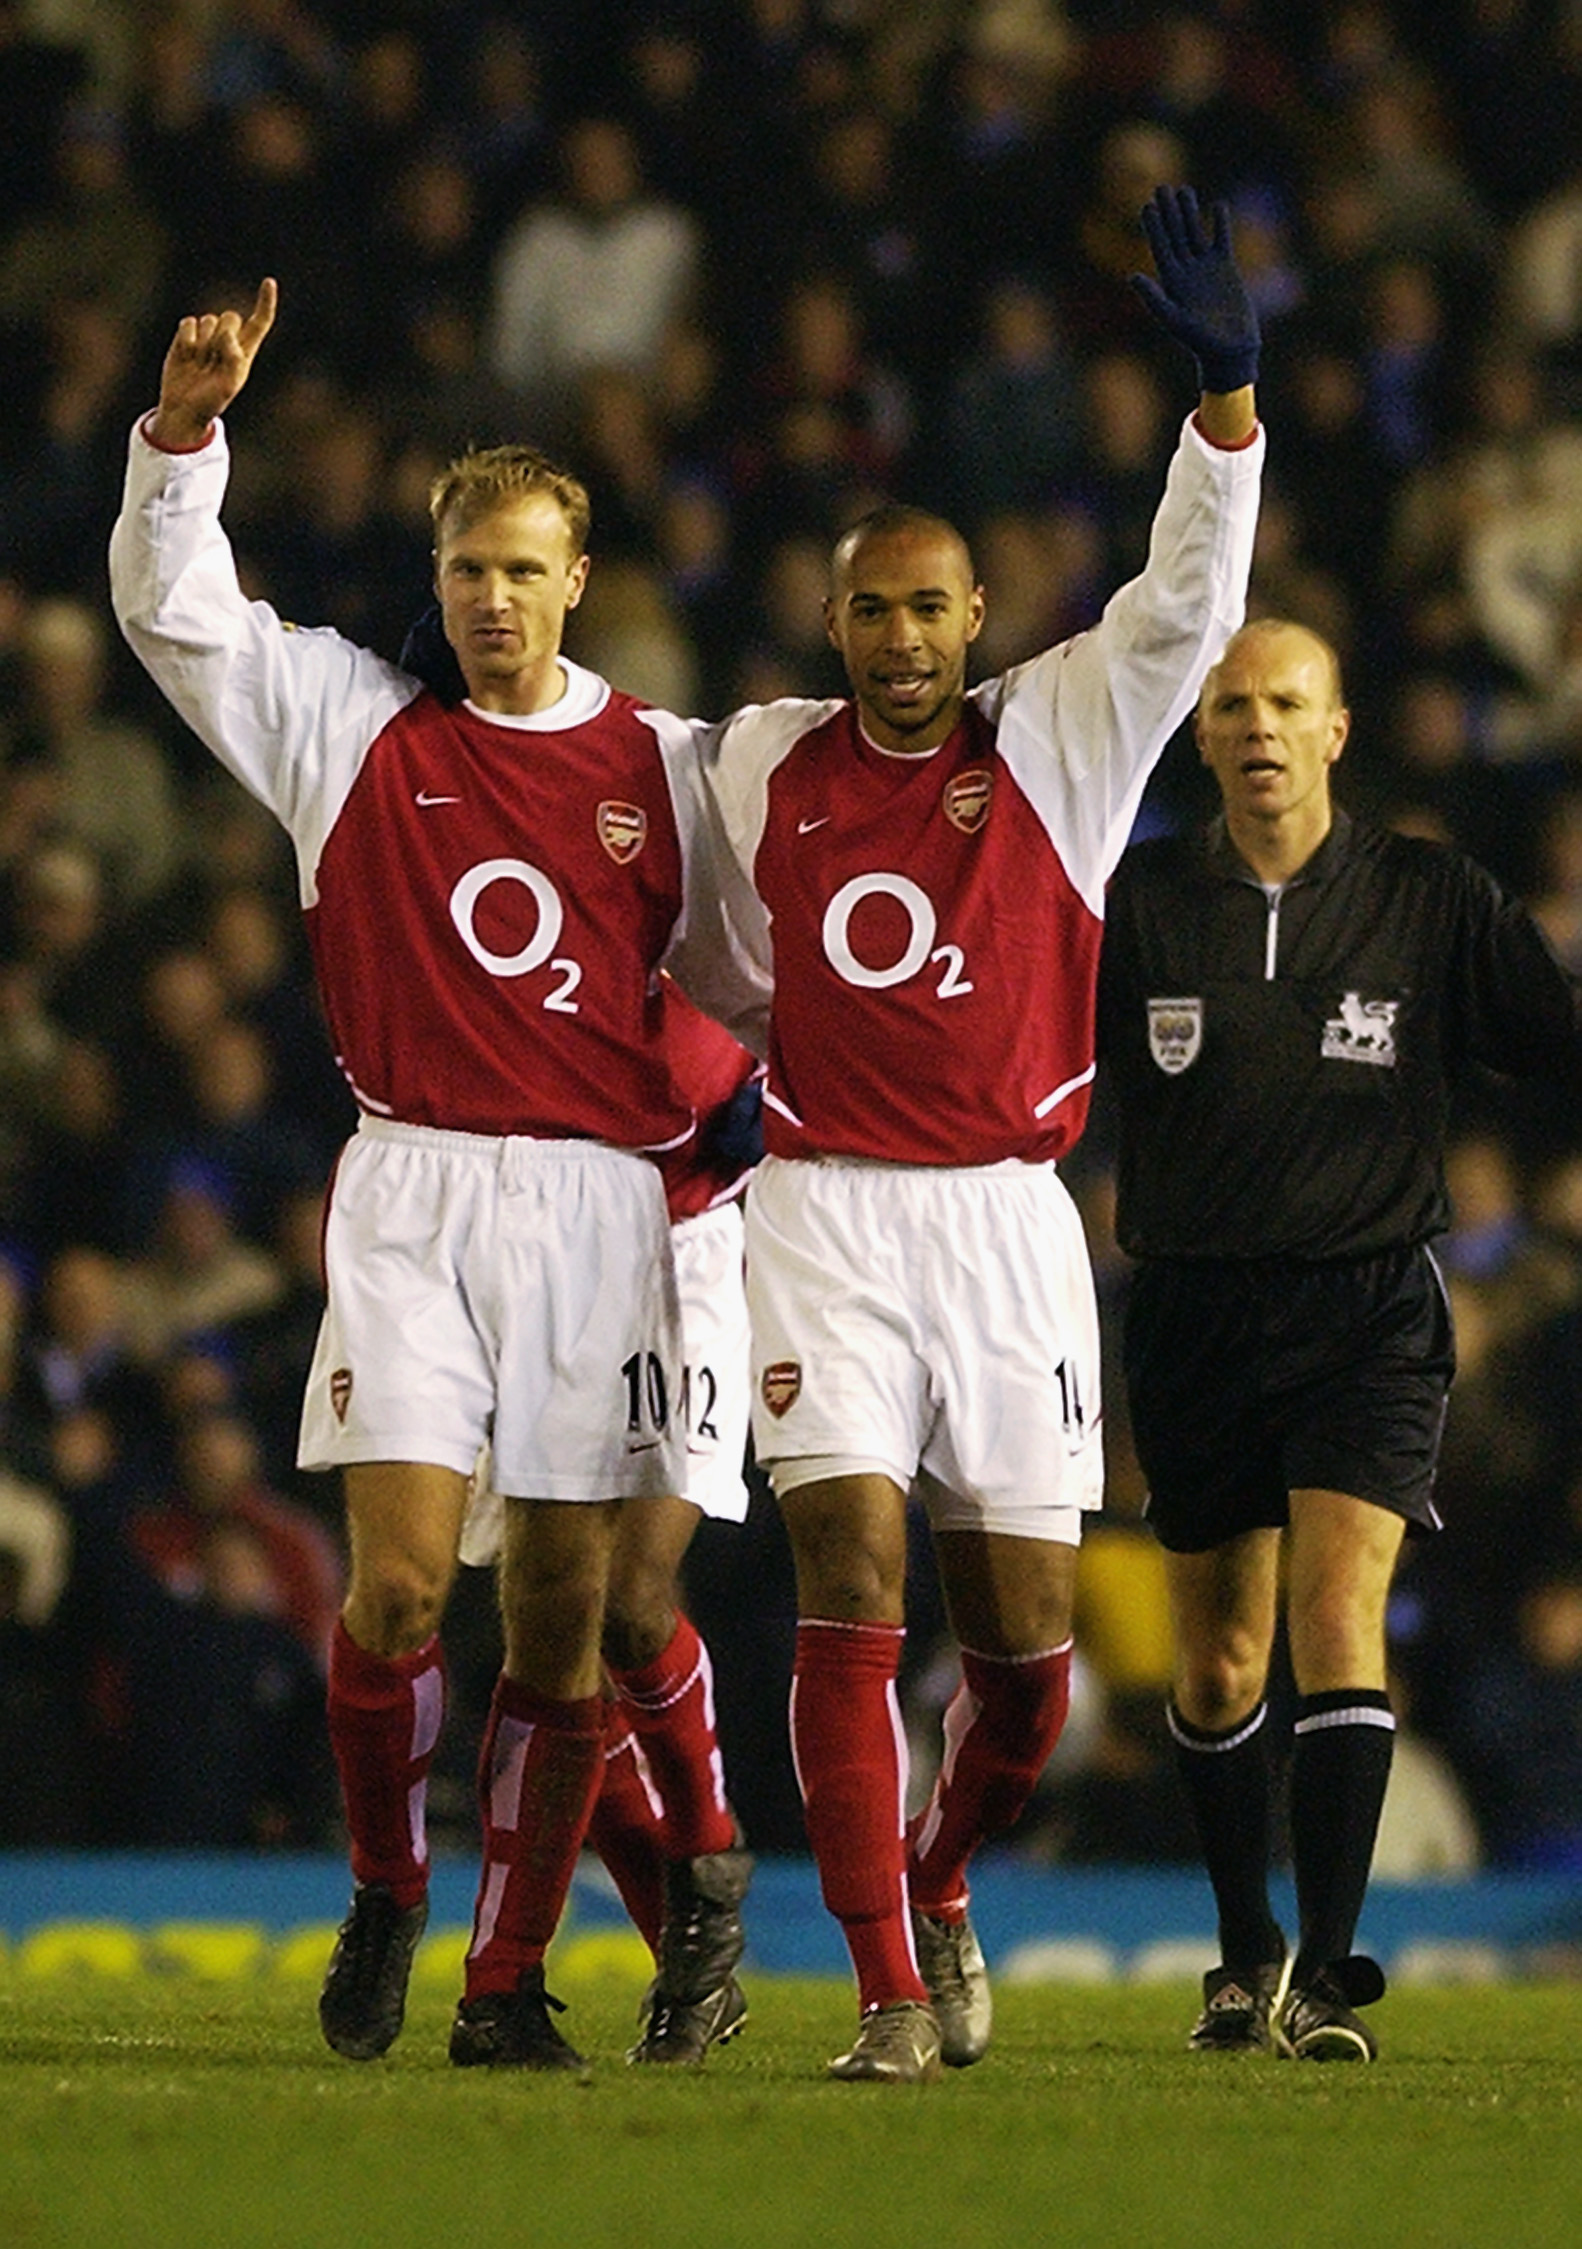 BIRMINGHAM - JANUARY 12:  Thierry Henry of Arsenal celebrates scoring his 100th goal for Arsenal with Dennis Bergkamp of Arsenal during the FA Barclaycard Premiership match between Birmingham City and Arsenal held on January 12, 2003 at St Andrews in Birm